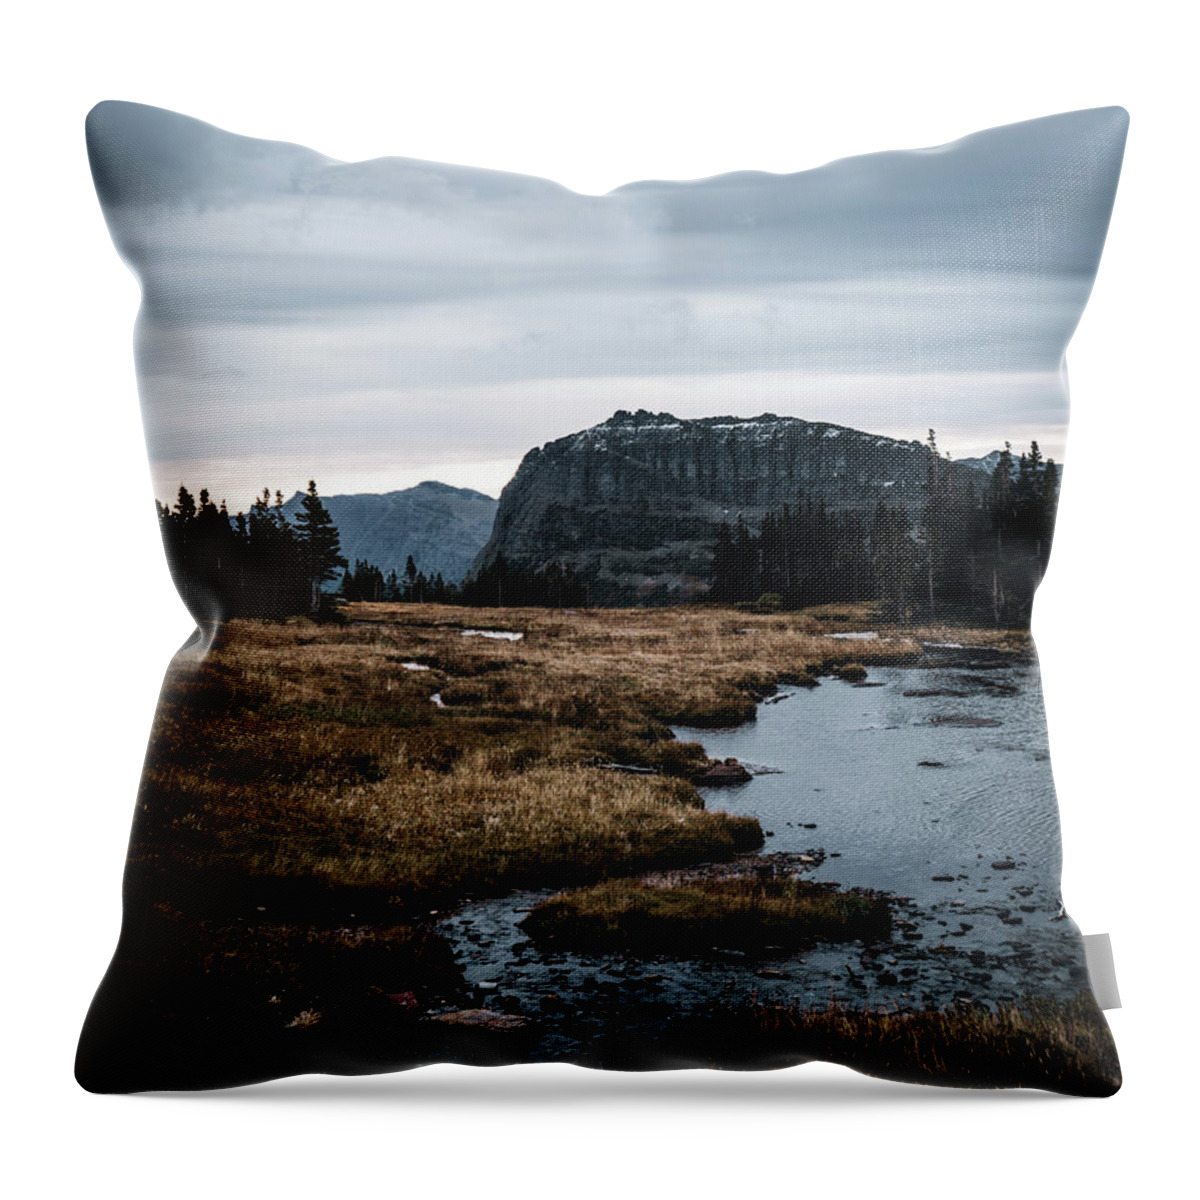  Throw Pillow featuring the photograph Hidden Puddle Overlook by William Boggs